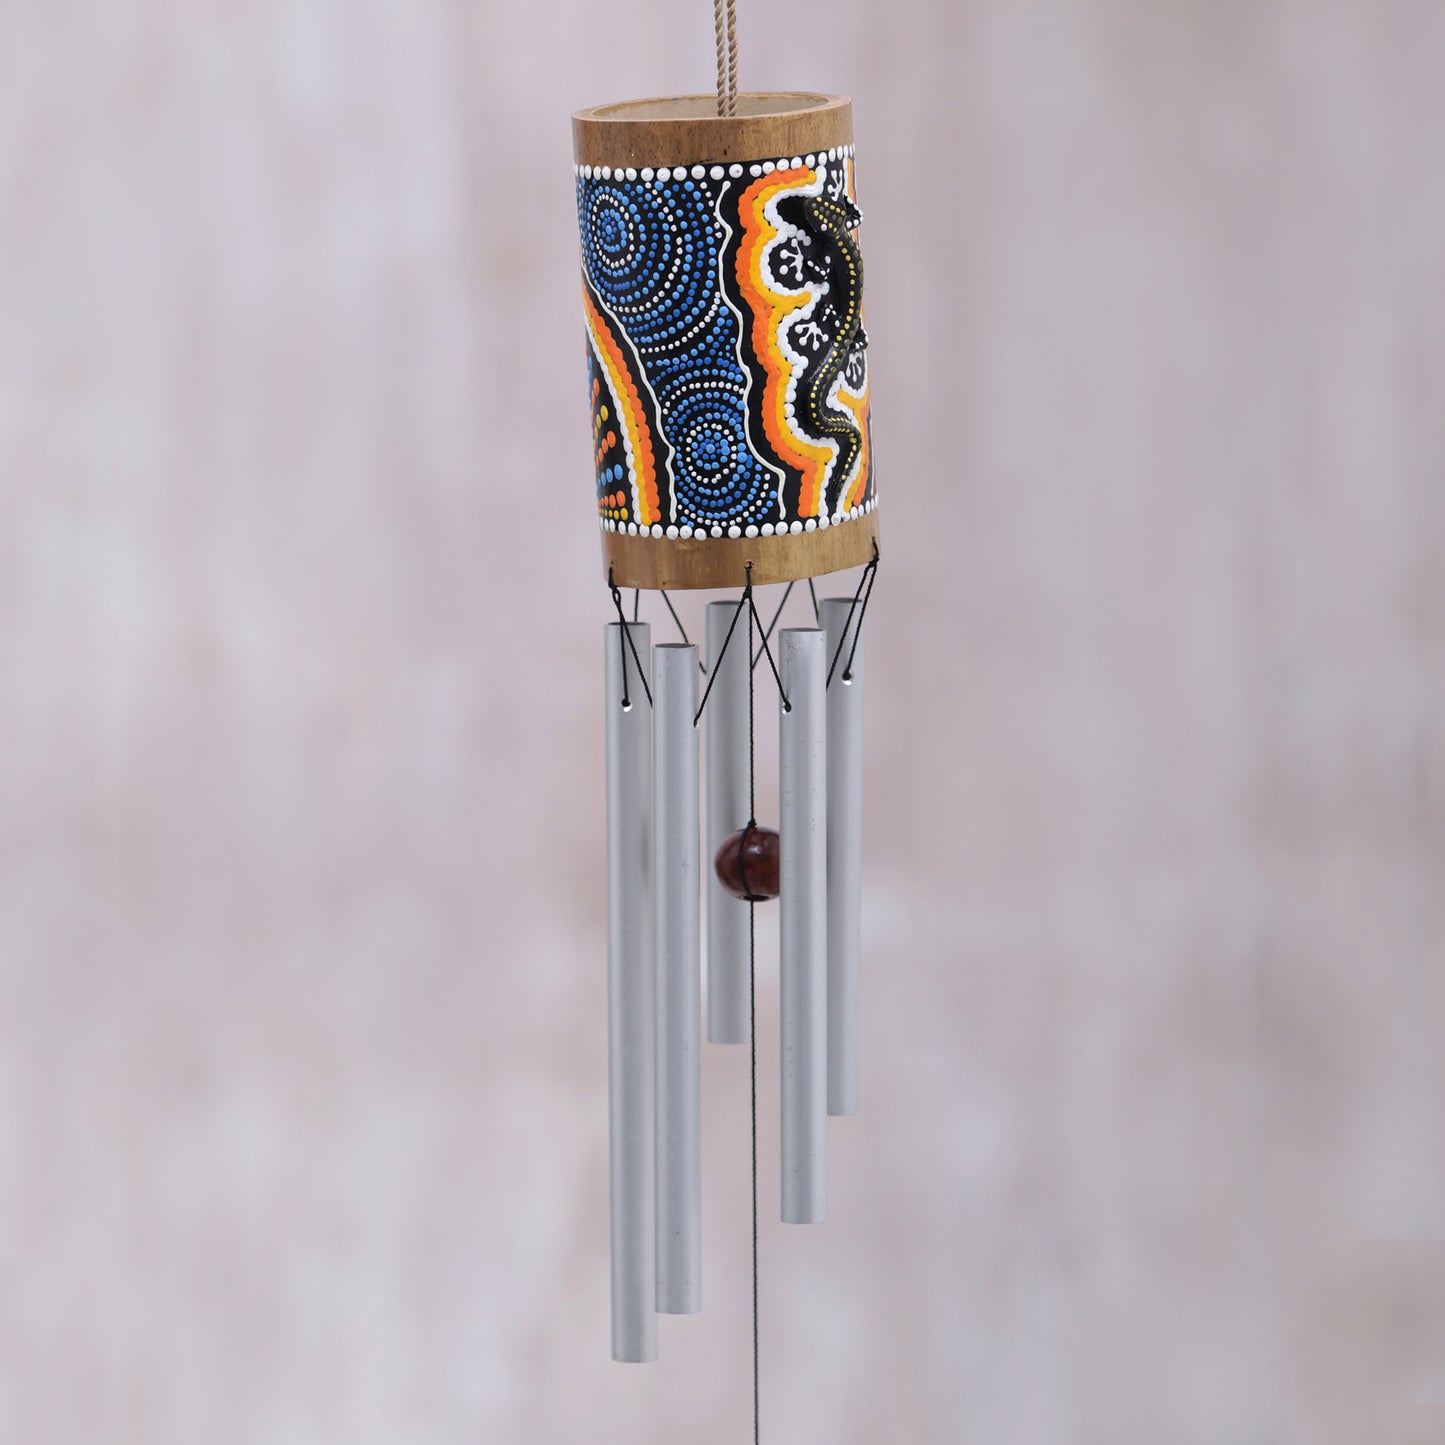 Papua Gecko Hand-Painted Gecko-Themed Bamboo Wind Chimes from Bali